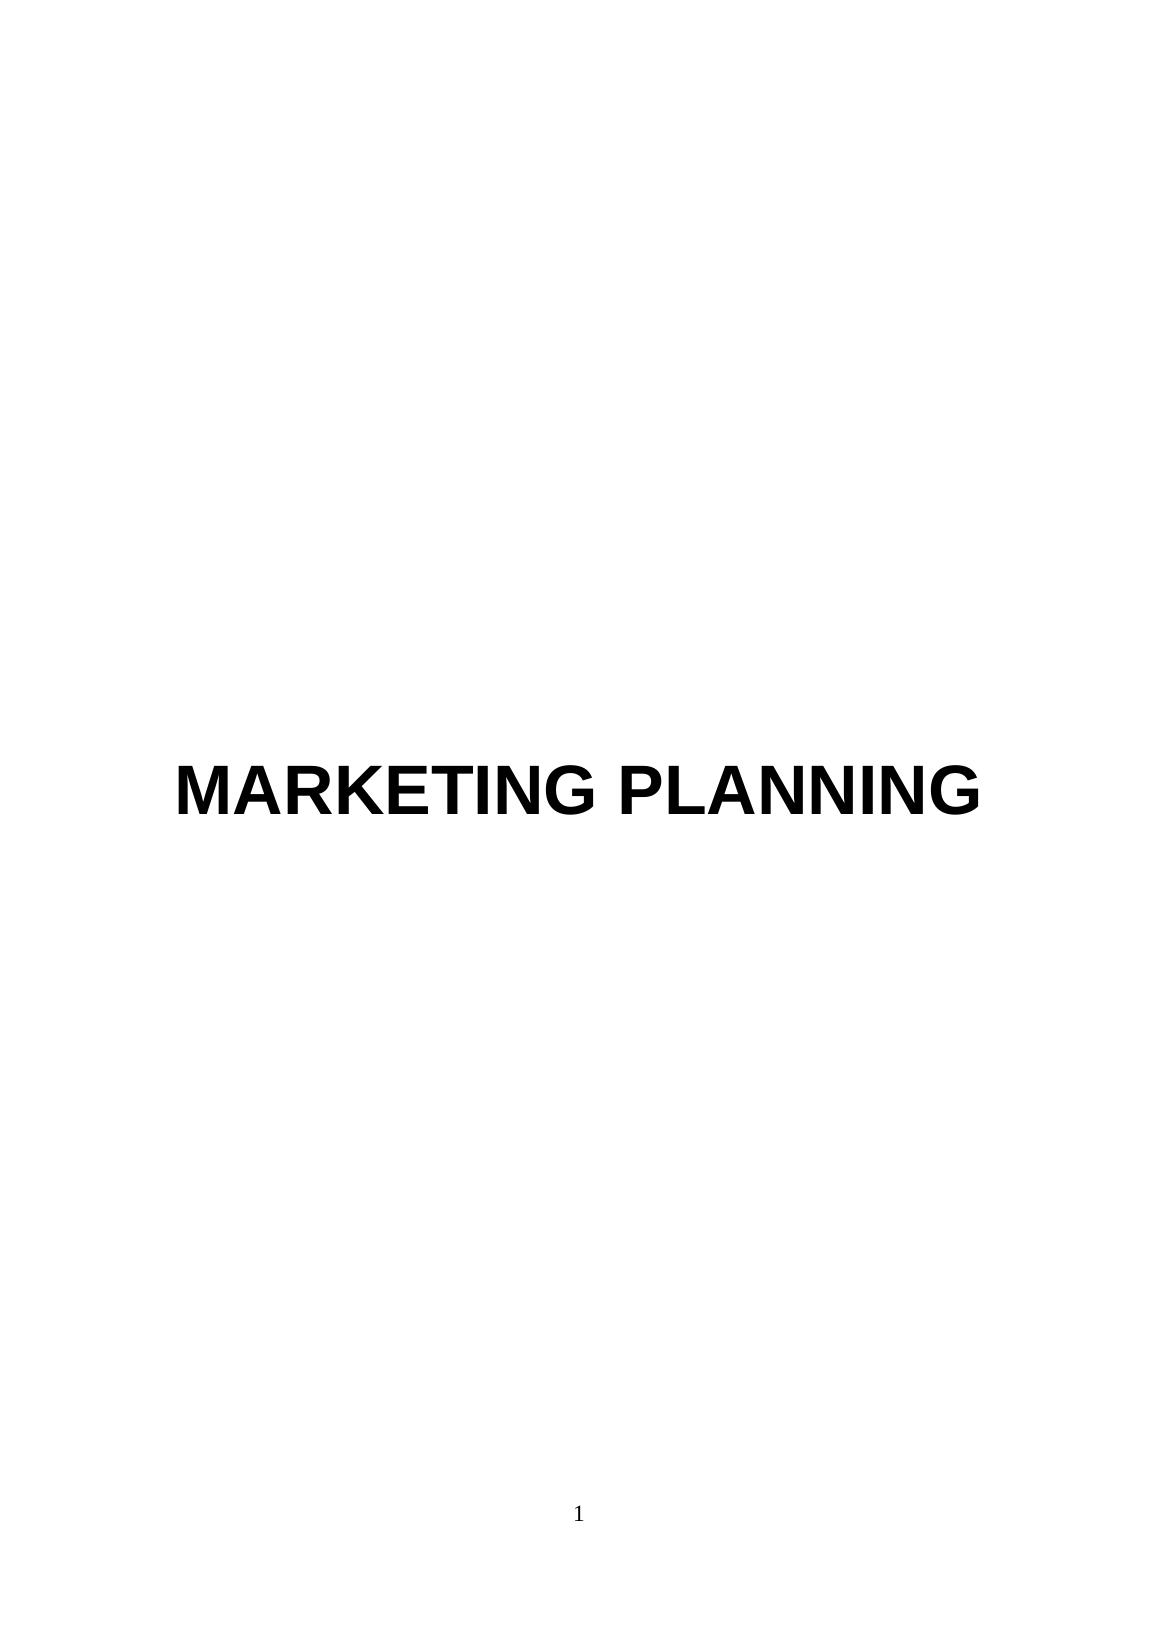 Report on Marketing Planning of H&M_1